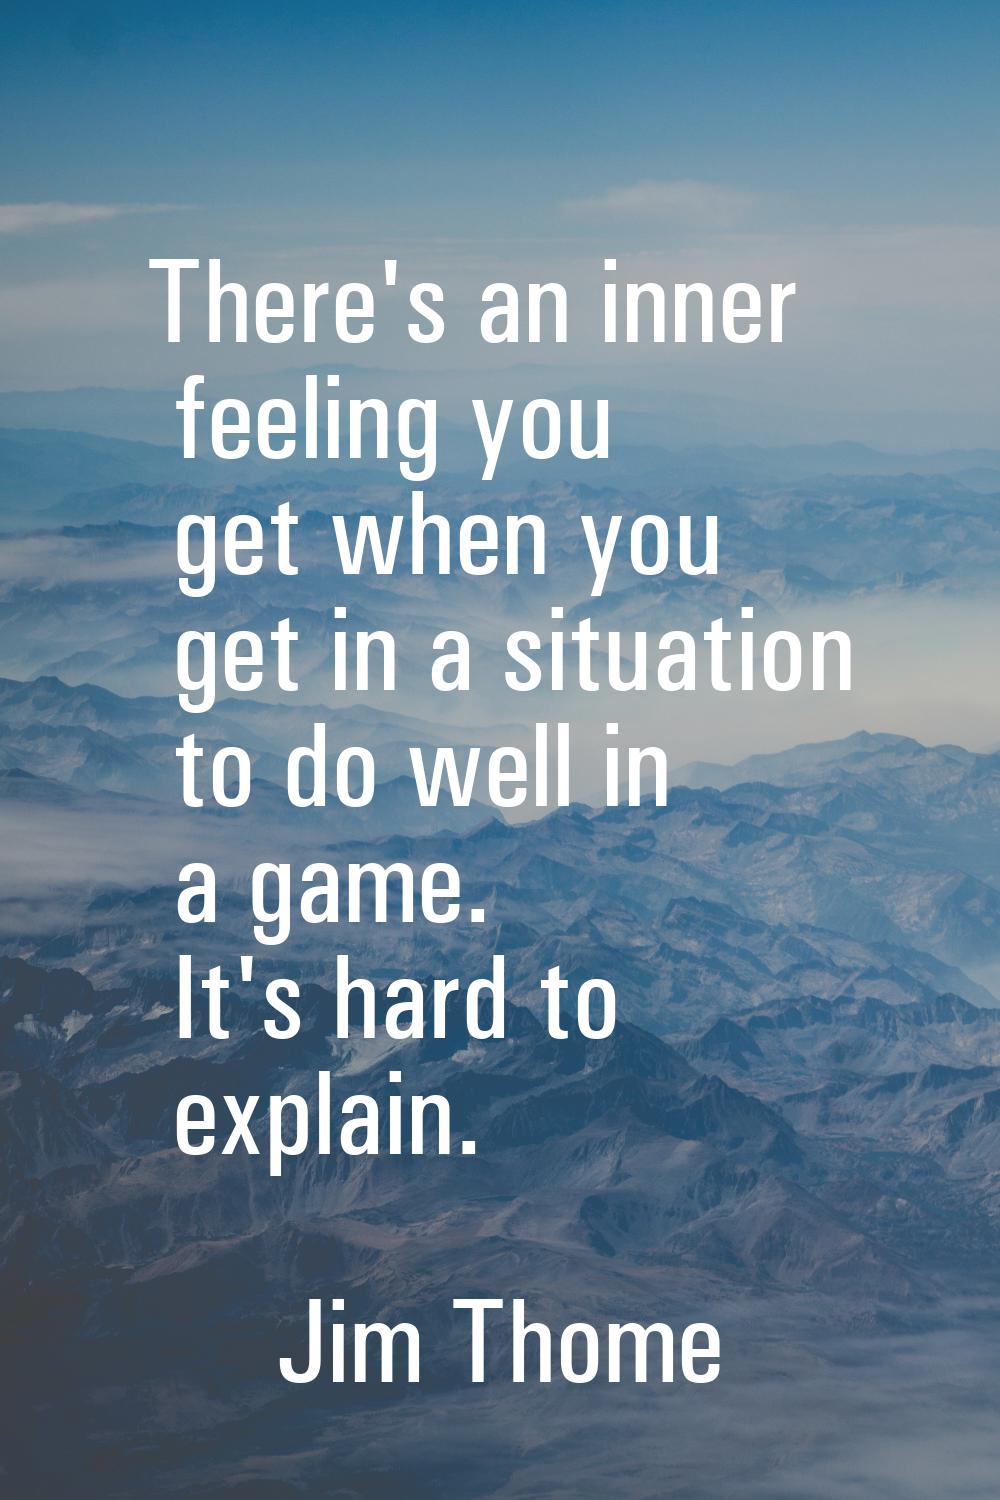 There's an inner feeling you get when you get in a situation to do well in a game. It's hard to exp